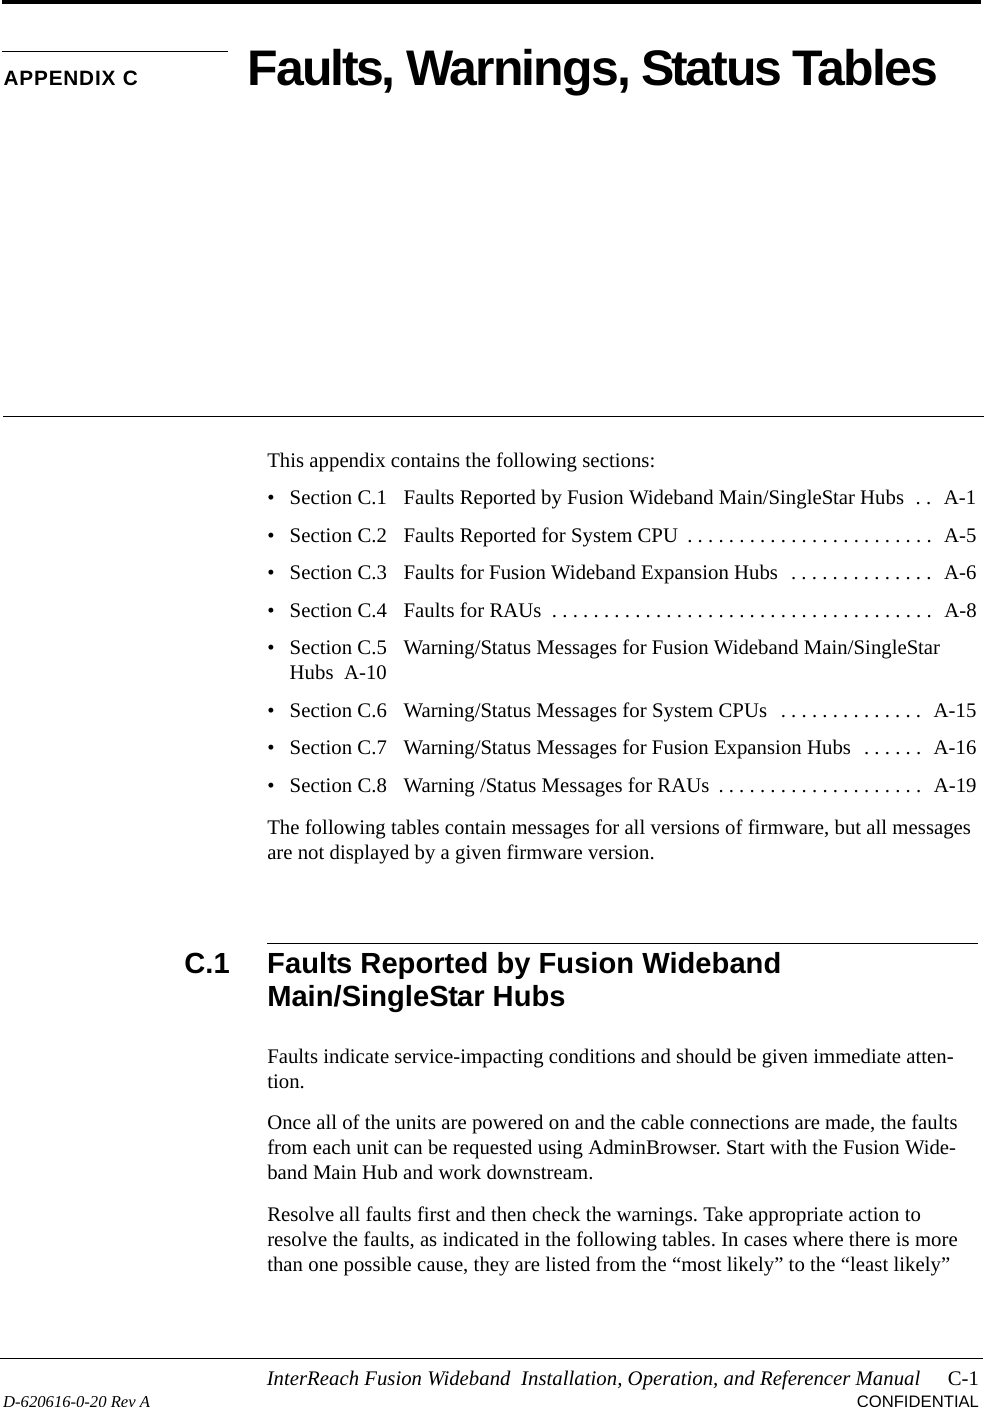 InterReach Fusion Wideband  Installation, Operation, and Referencer Manual C-1D-620616-0-20 Rev A CONFIDENTIALAPPENDIX C Faults, Warnings, Status TablesThis appendix contains the following sections:• Section C.1   Faults Reported by Fusion Wideband Main/SingleStar Hubs  . .  A-1• Section C.2   Faults Reported for System CPU  . . . . . . . . . . . . . . . . . . . . . . . .  A-5• Section C.3   Faults for Fusion Wideband Expansion Hubs  . . . . . . . . . . . . . .  A-6• Section C.4   Faults for RAUs  . . . . . . . . . . . . . . . . . . . . . . . . . . . . . . . . . . . . .  A-8• Section C.5   Warning/Status Messages for Fusion Wideband Main/SingleStar Hubs  A-10• Section C.6   Warning/Status Messages for System CPUs  . . . . . . . . . . . . . .  A-15• Section C.7   Warning/Status Messages for Fusion Expansion Hubs  . . . . . .  A-16• Section C.8   Warning /Status Messages for RAUs  . . . . . . . . . . . . . . . . . . . .  A-19The following tables contain messages for all versions of firmware, but all messages are not displayed by a given firmware version.C.1 Faults Reported by Fusion Wideband Main/SingleStar HubsFaults indicate service-impacting conditions and should be given immediate atten-tion.Once all of the units are powered on and the cable connections are made, the faults from each unit can be requested using AdminBrowser. Start with the Fusion Wide-band Main Hub and work downstream.Resolve all faults first and then check the warnings. Take appropriate action to resolve the faults, as indicated in the following tables. In cases where there is more than one possible cause, they are listed from the “most likely” to the “least likely” 